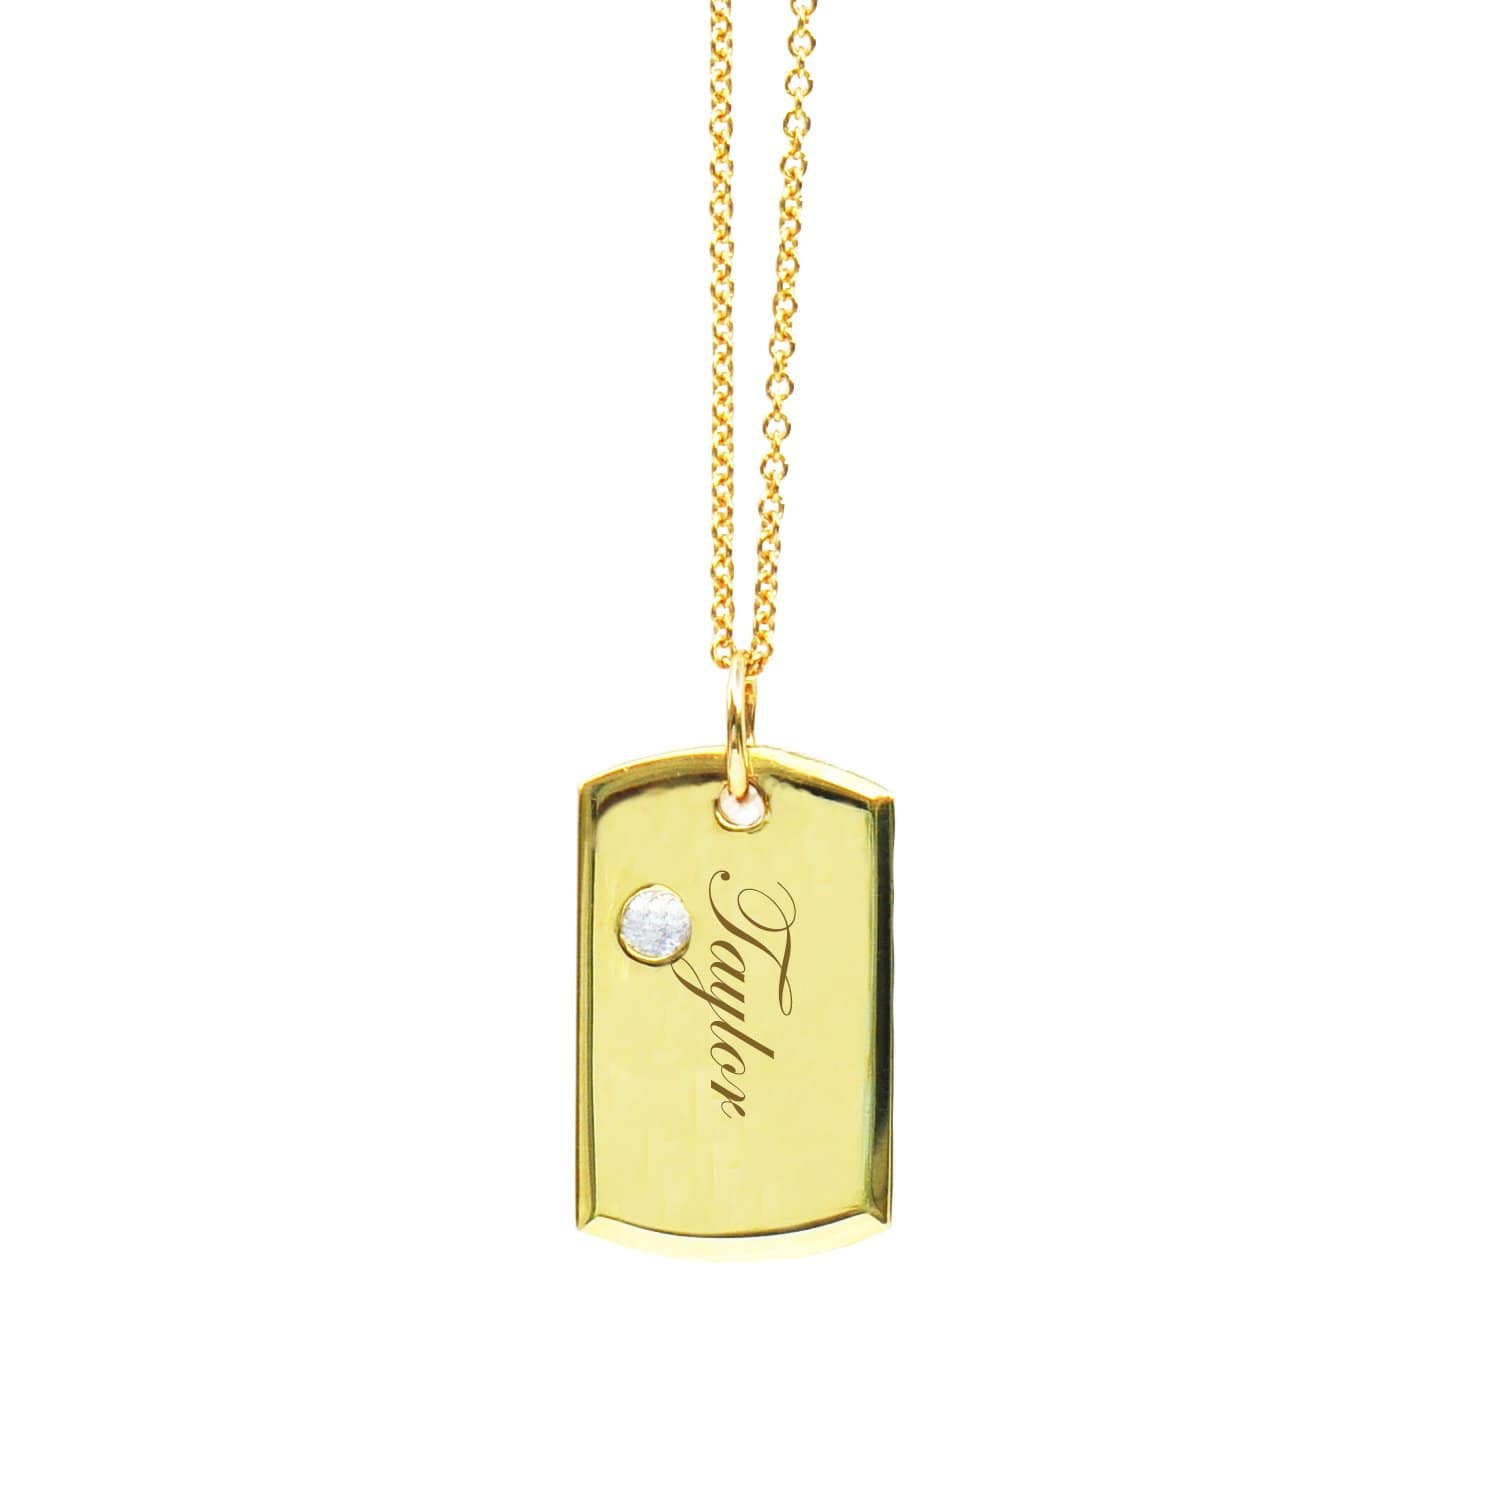 18K Yellow Gold Military Dog Tag with Diamond & Monogram 18-karat Amber Hue Gold from Our Signature Red Gold Collection